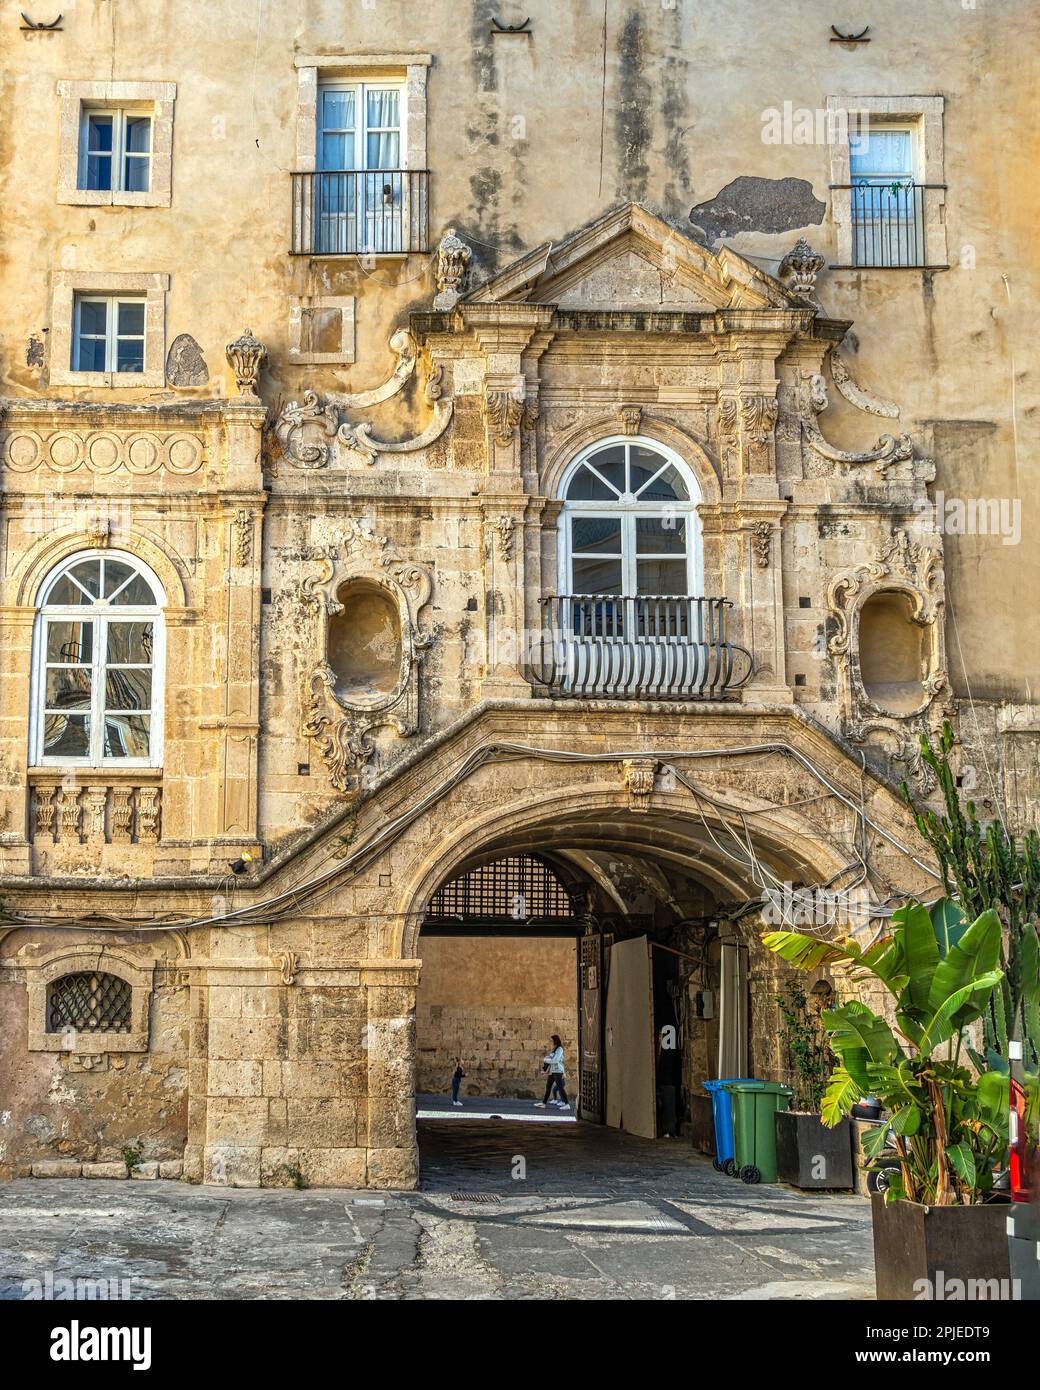 Internal facade, decorated in Baroque style, to a courtyard of one of the noble palaces of the island of Ortigia in Syracuse. Sicily, Italy, Europe Stock Photo